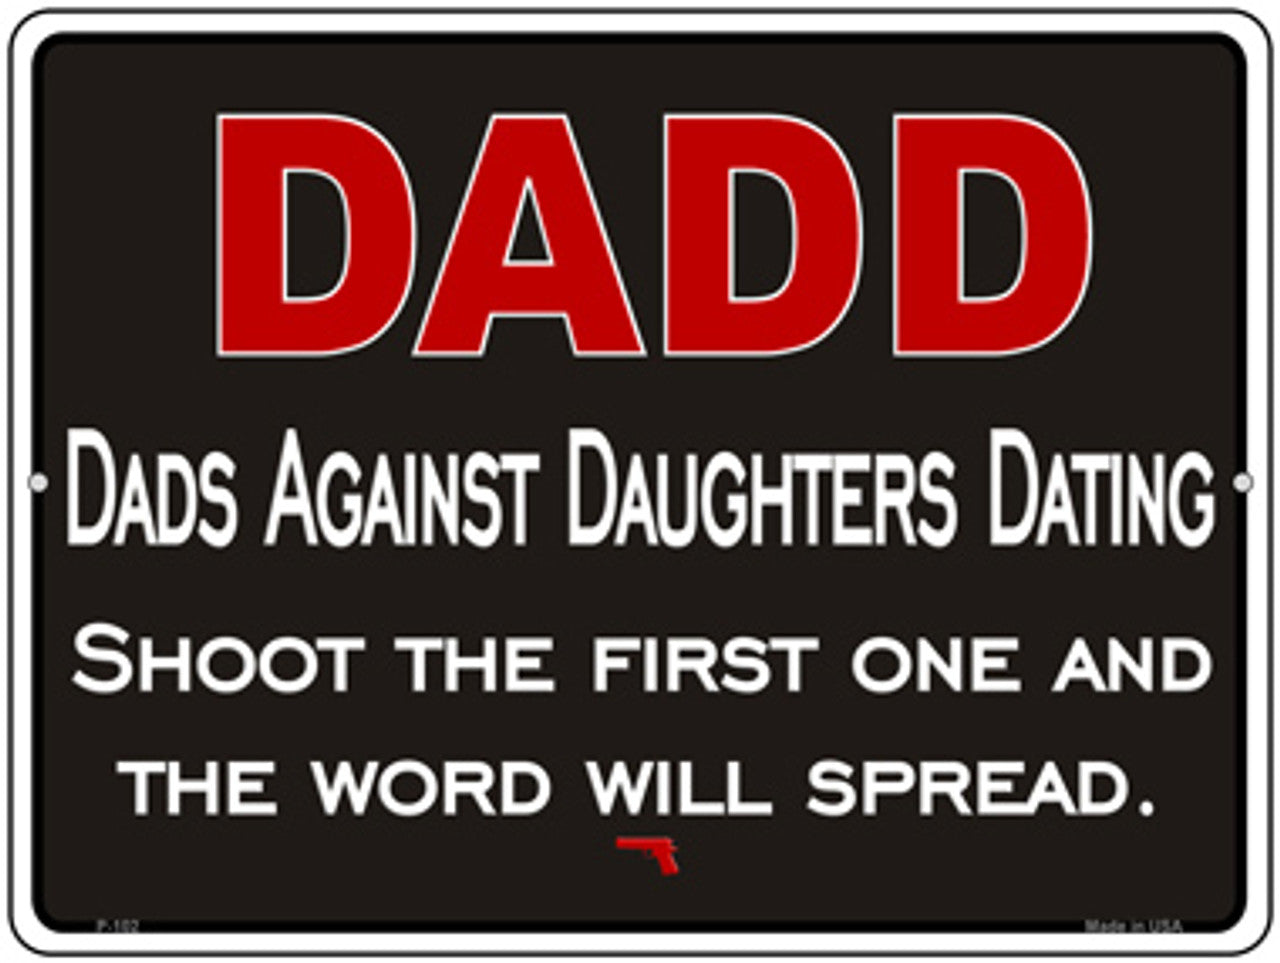 "Dad Against Daughters Dating" Metal Parking Sign - 9" x 12", Weather Resistant, High-Quality Aluminum, Pre-drilled Holes, Made in USA. Brand New and easy to mount.